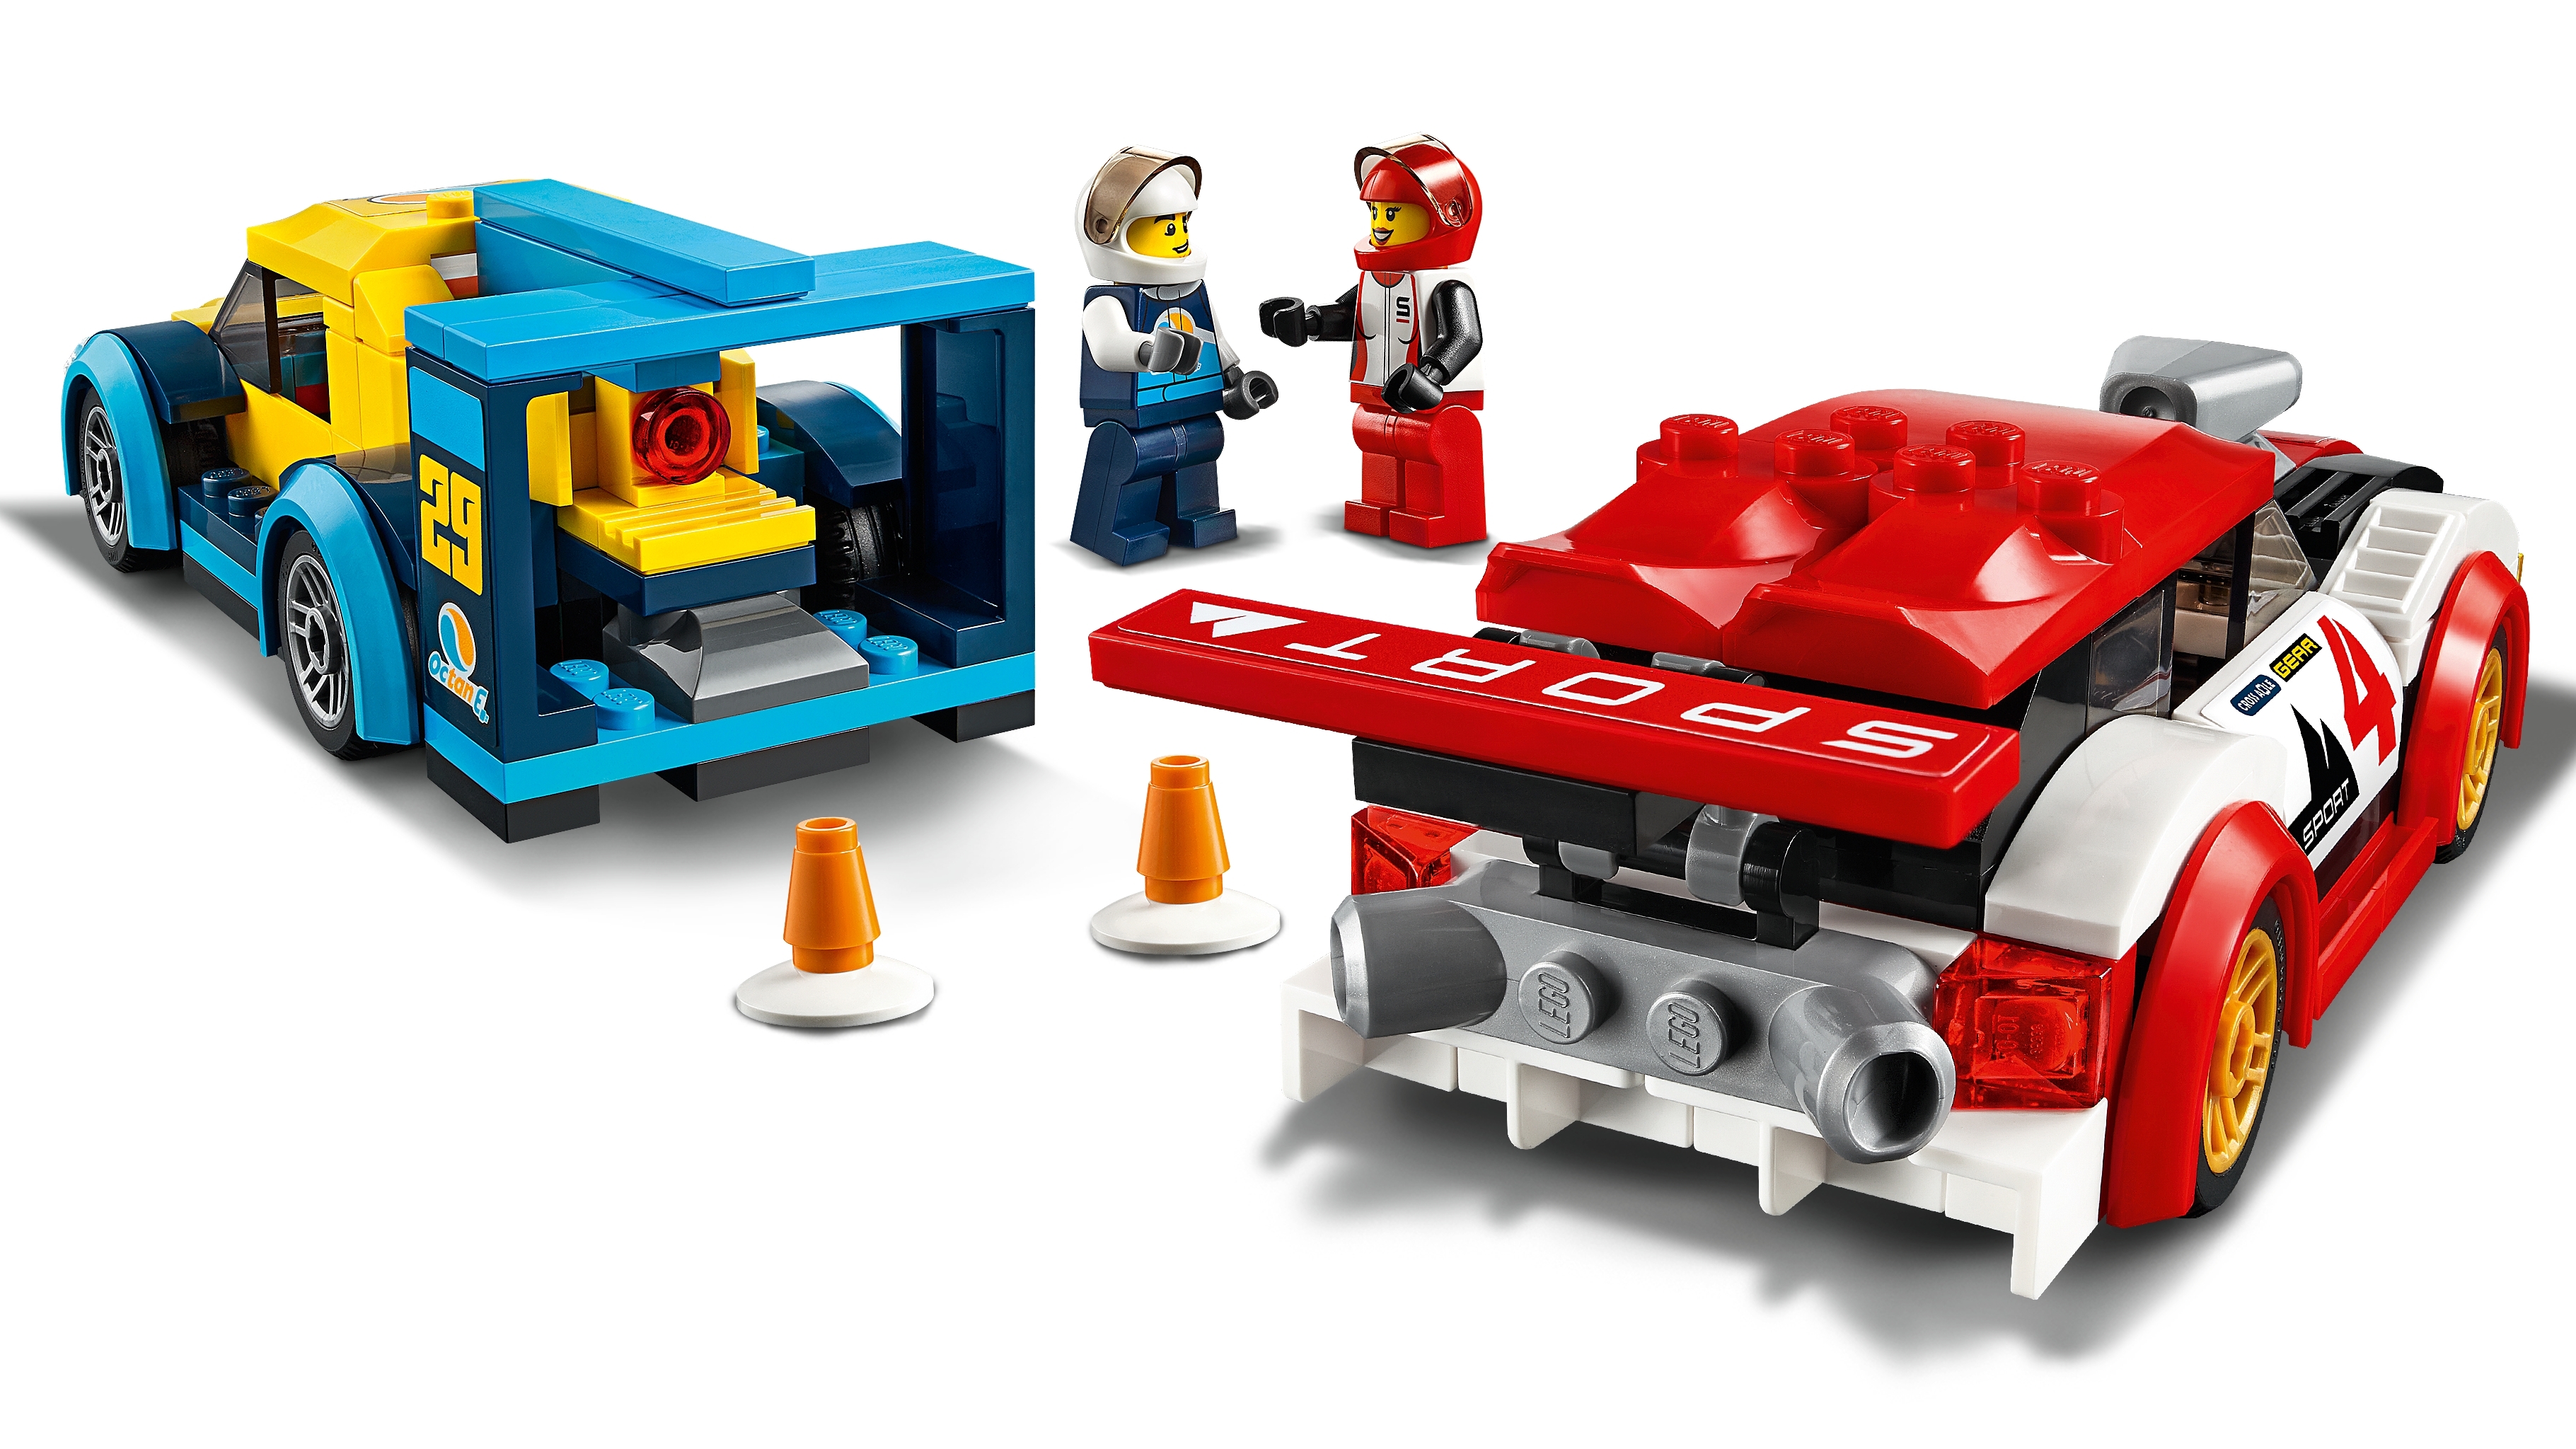 LEGO Racing Cars City Nitro Wheels 60256 for sale online